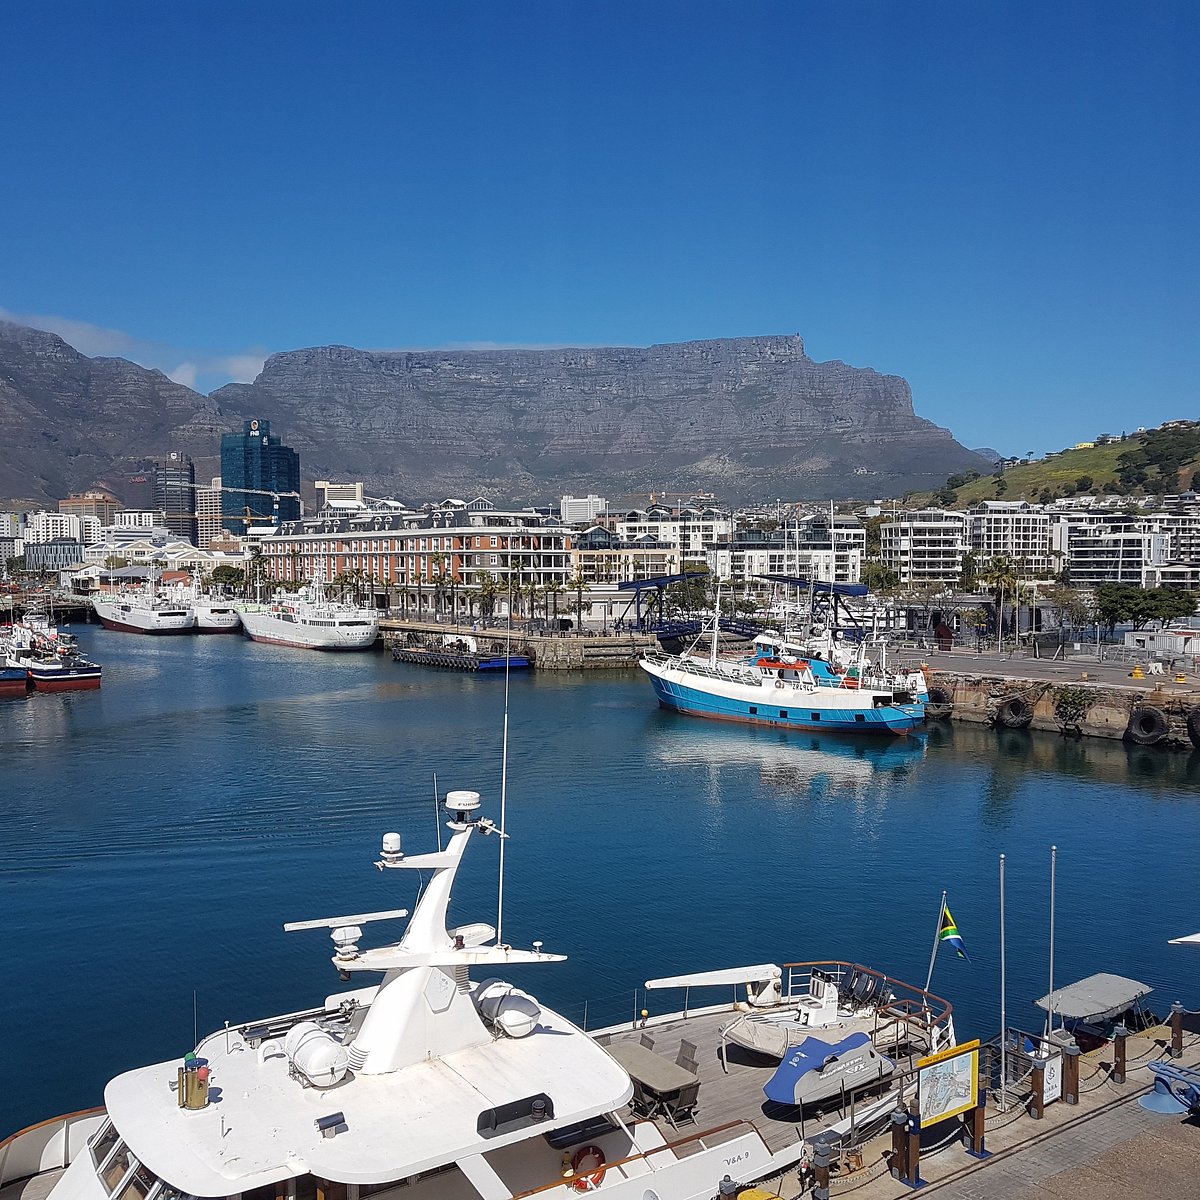 Top 10 Things to Do in the V&A Waterfront